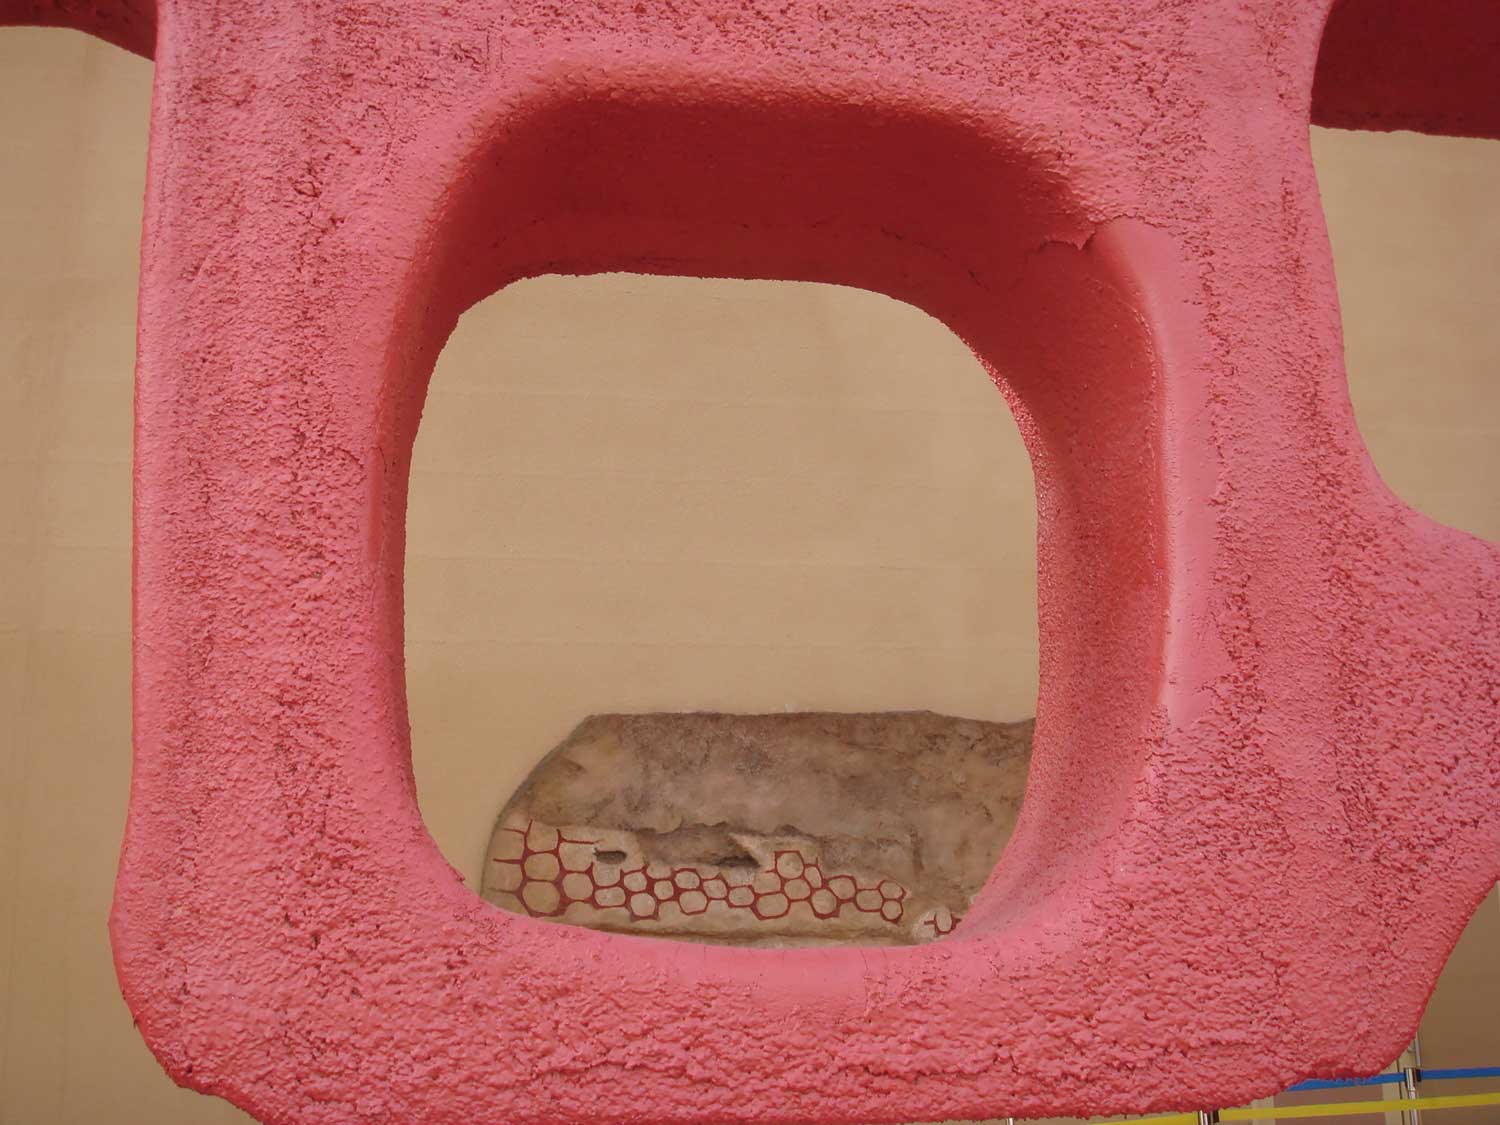 Detail of the notable, decorative, red structure encasing the pavilion.